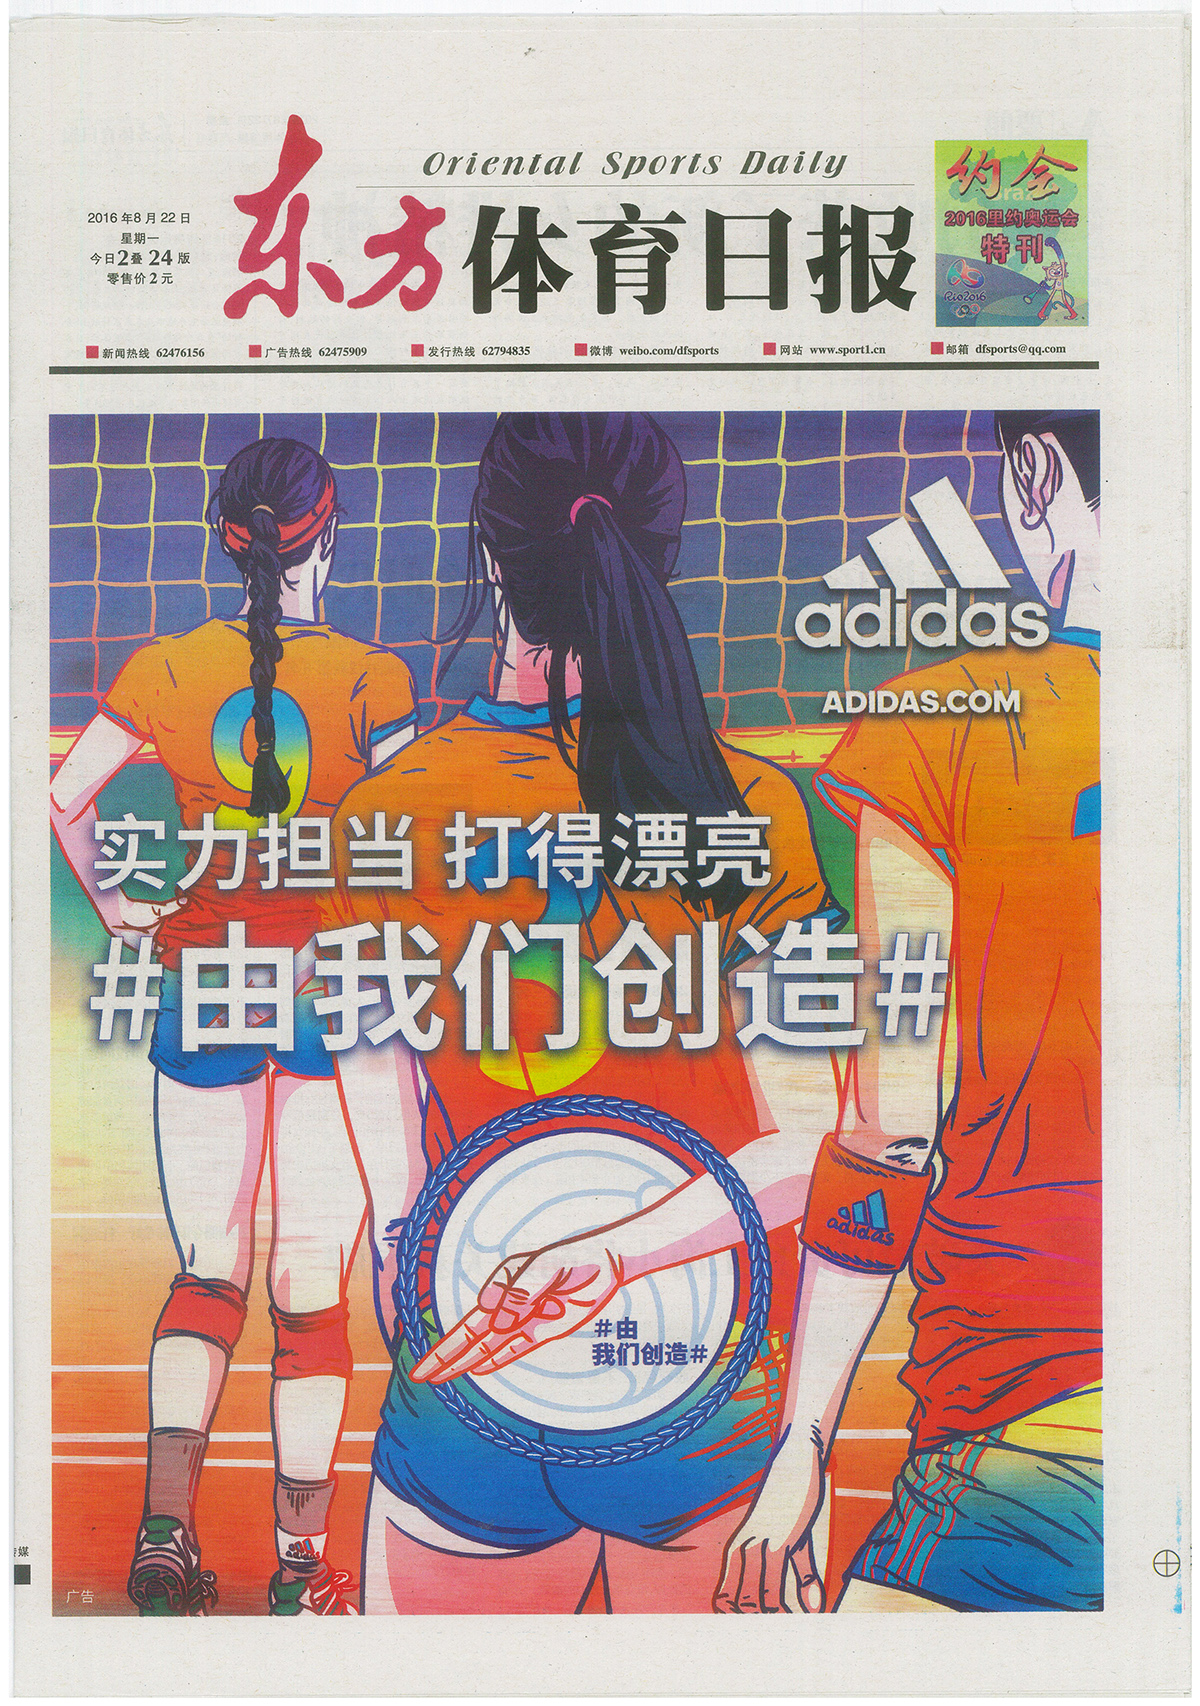 adidas volleyball three fingers rio olympics Olympics shanghai adidas chinese volleyball team social campaign gold